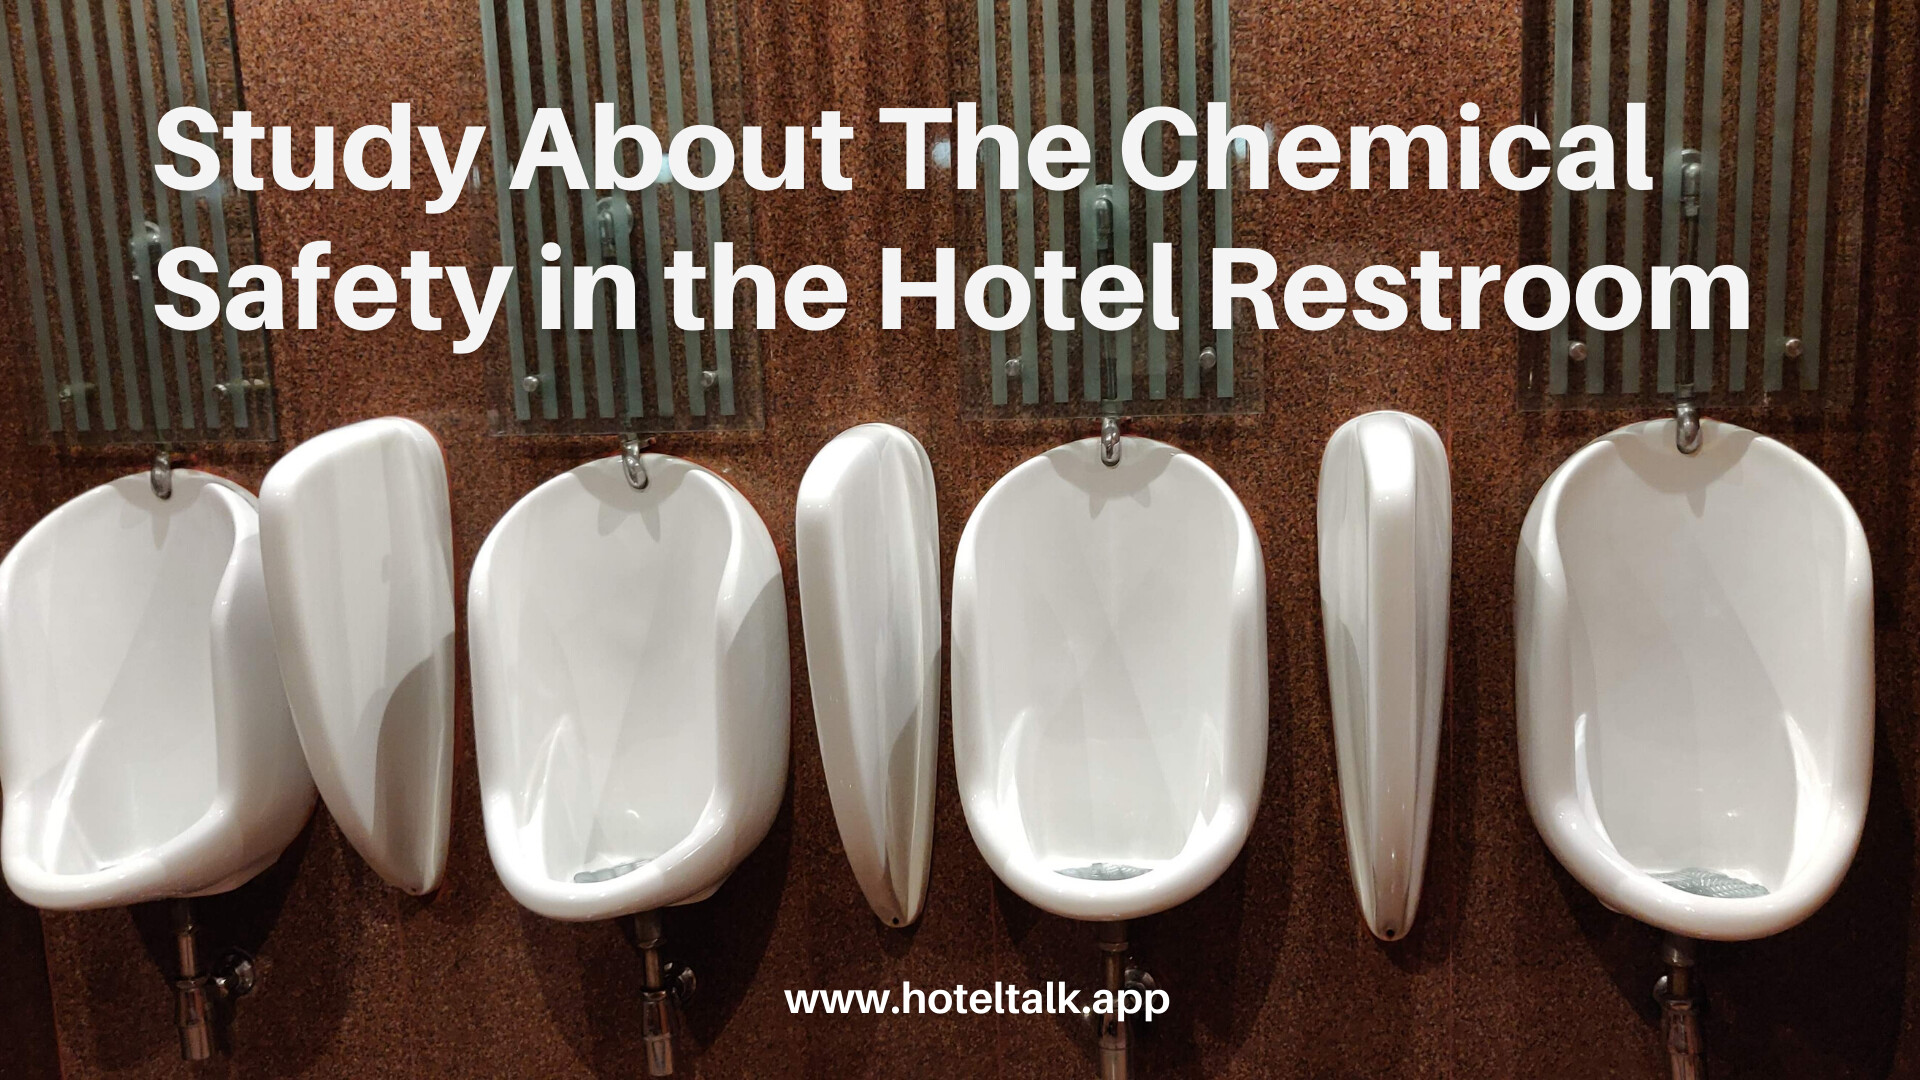 Study About The Chemical Safety in the Hotel Restroom